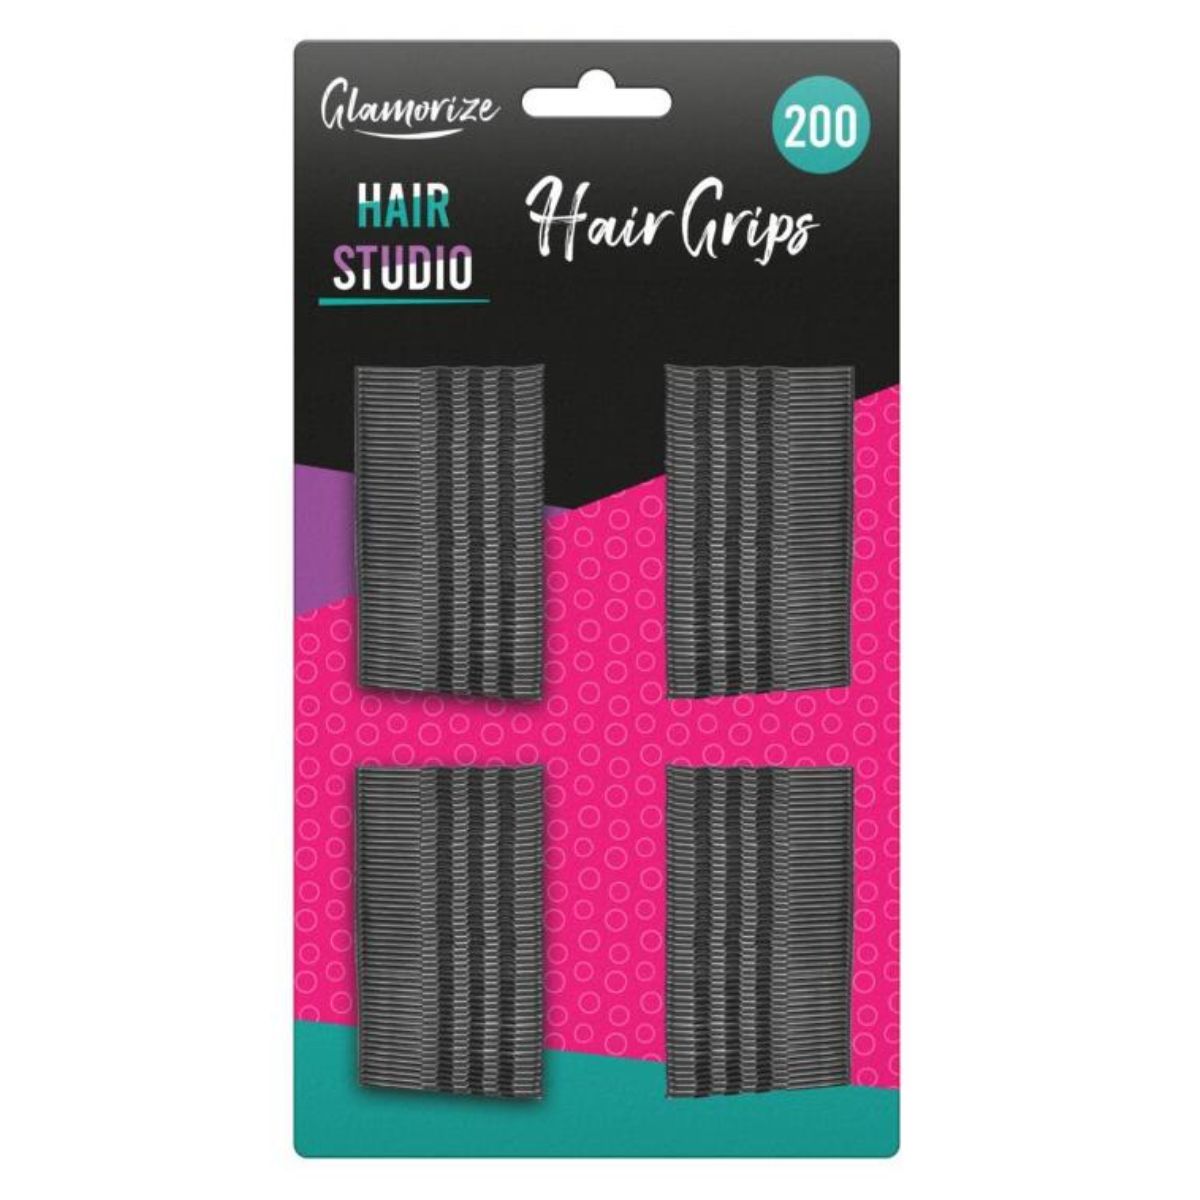 Packaging of "Glamorize - Hair Grips - 200pcs" containing 200 black hair grips.